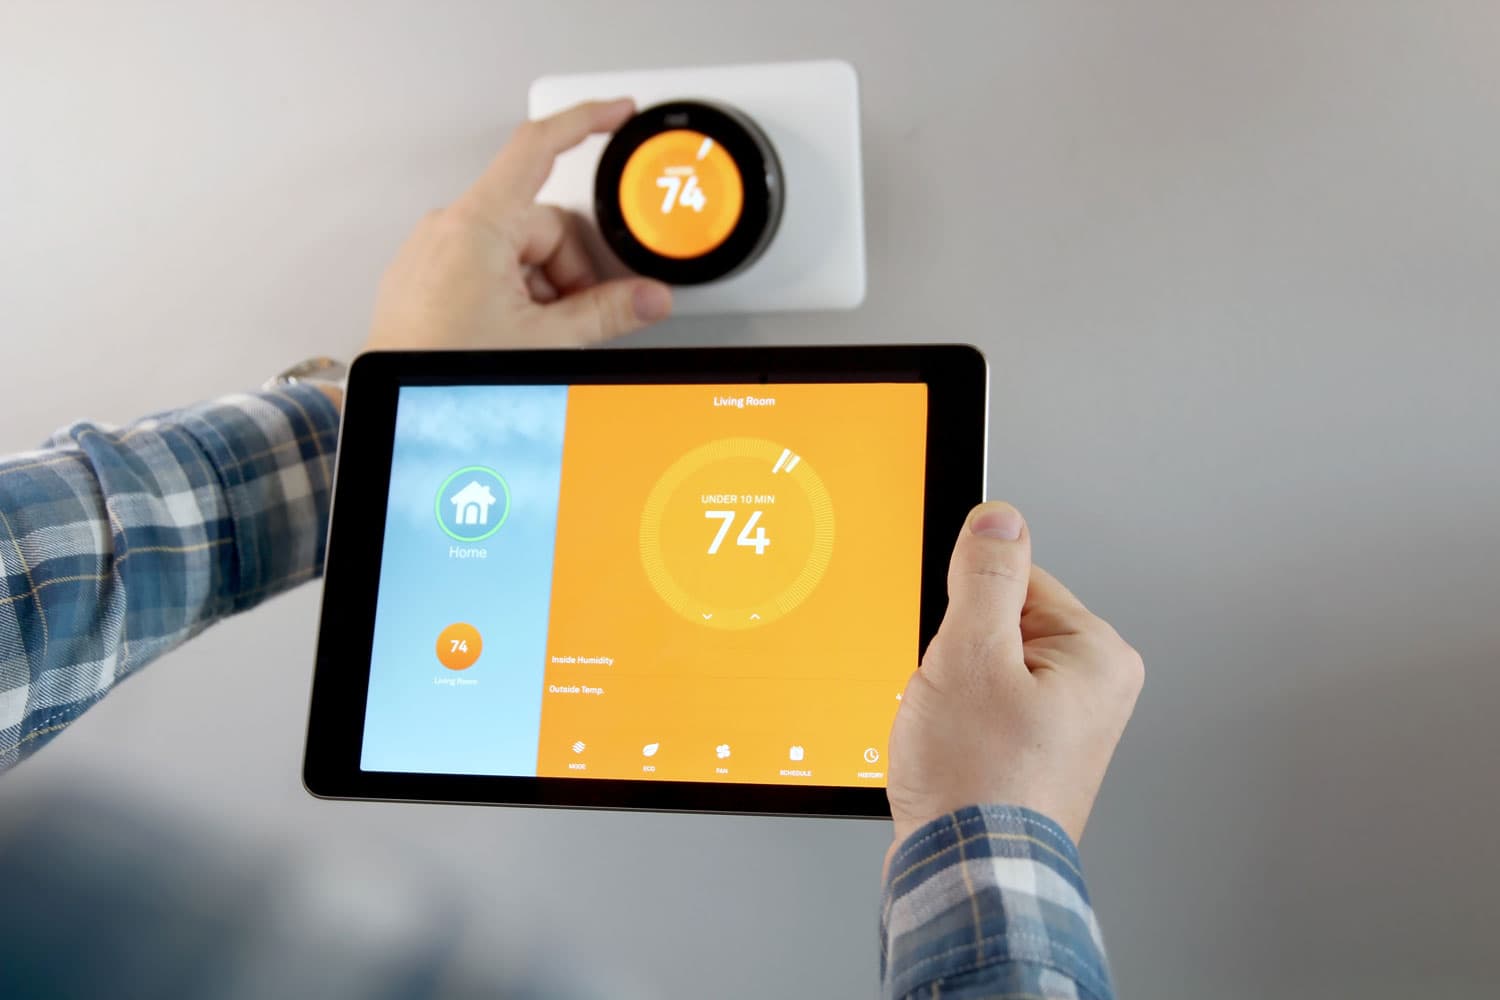 Setting the Nest thermostat to 74 degrees using the iPad